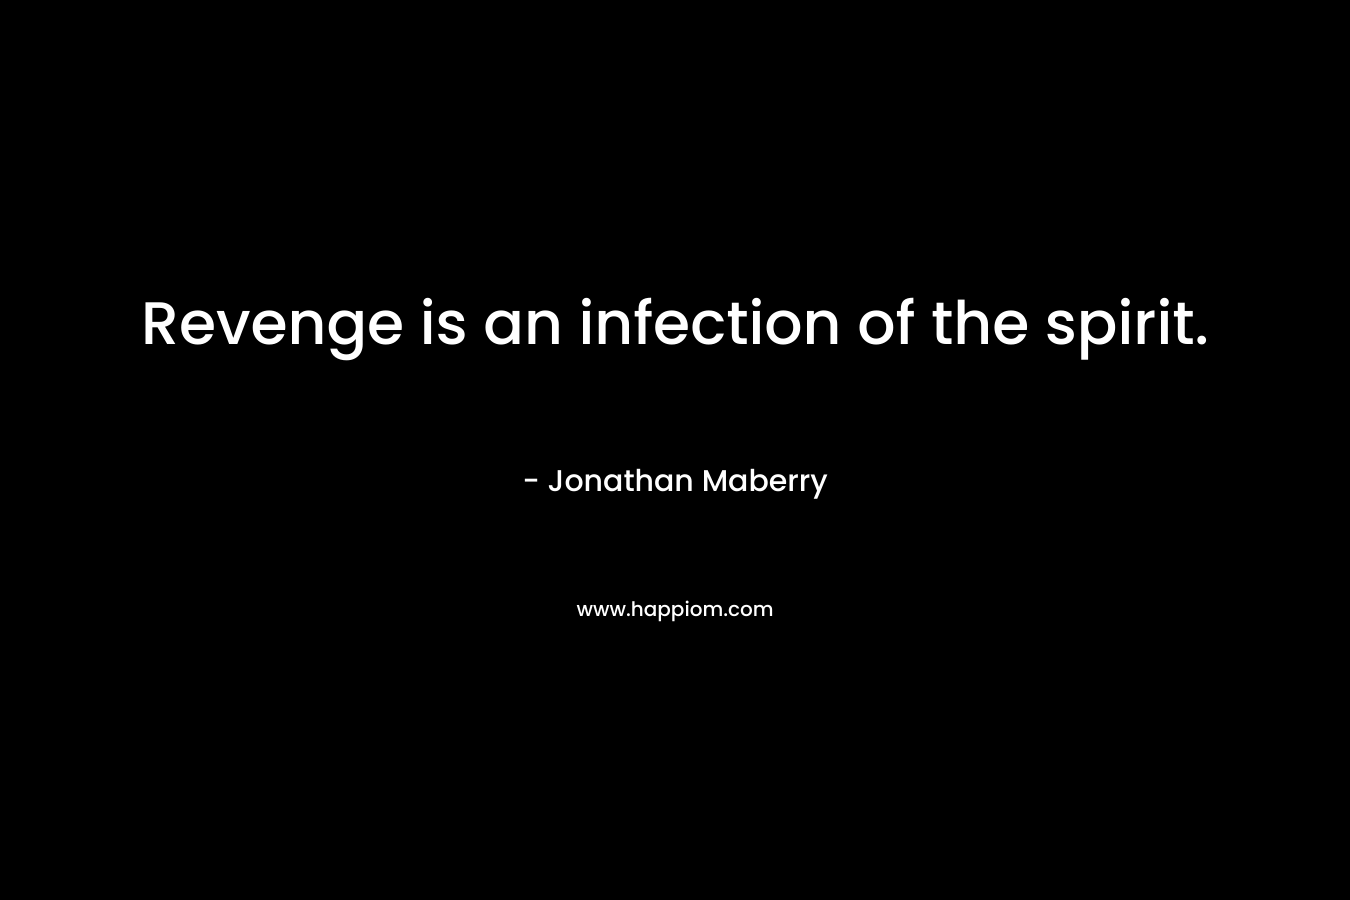 Revenge is an infection of the spirit.